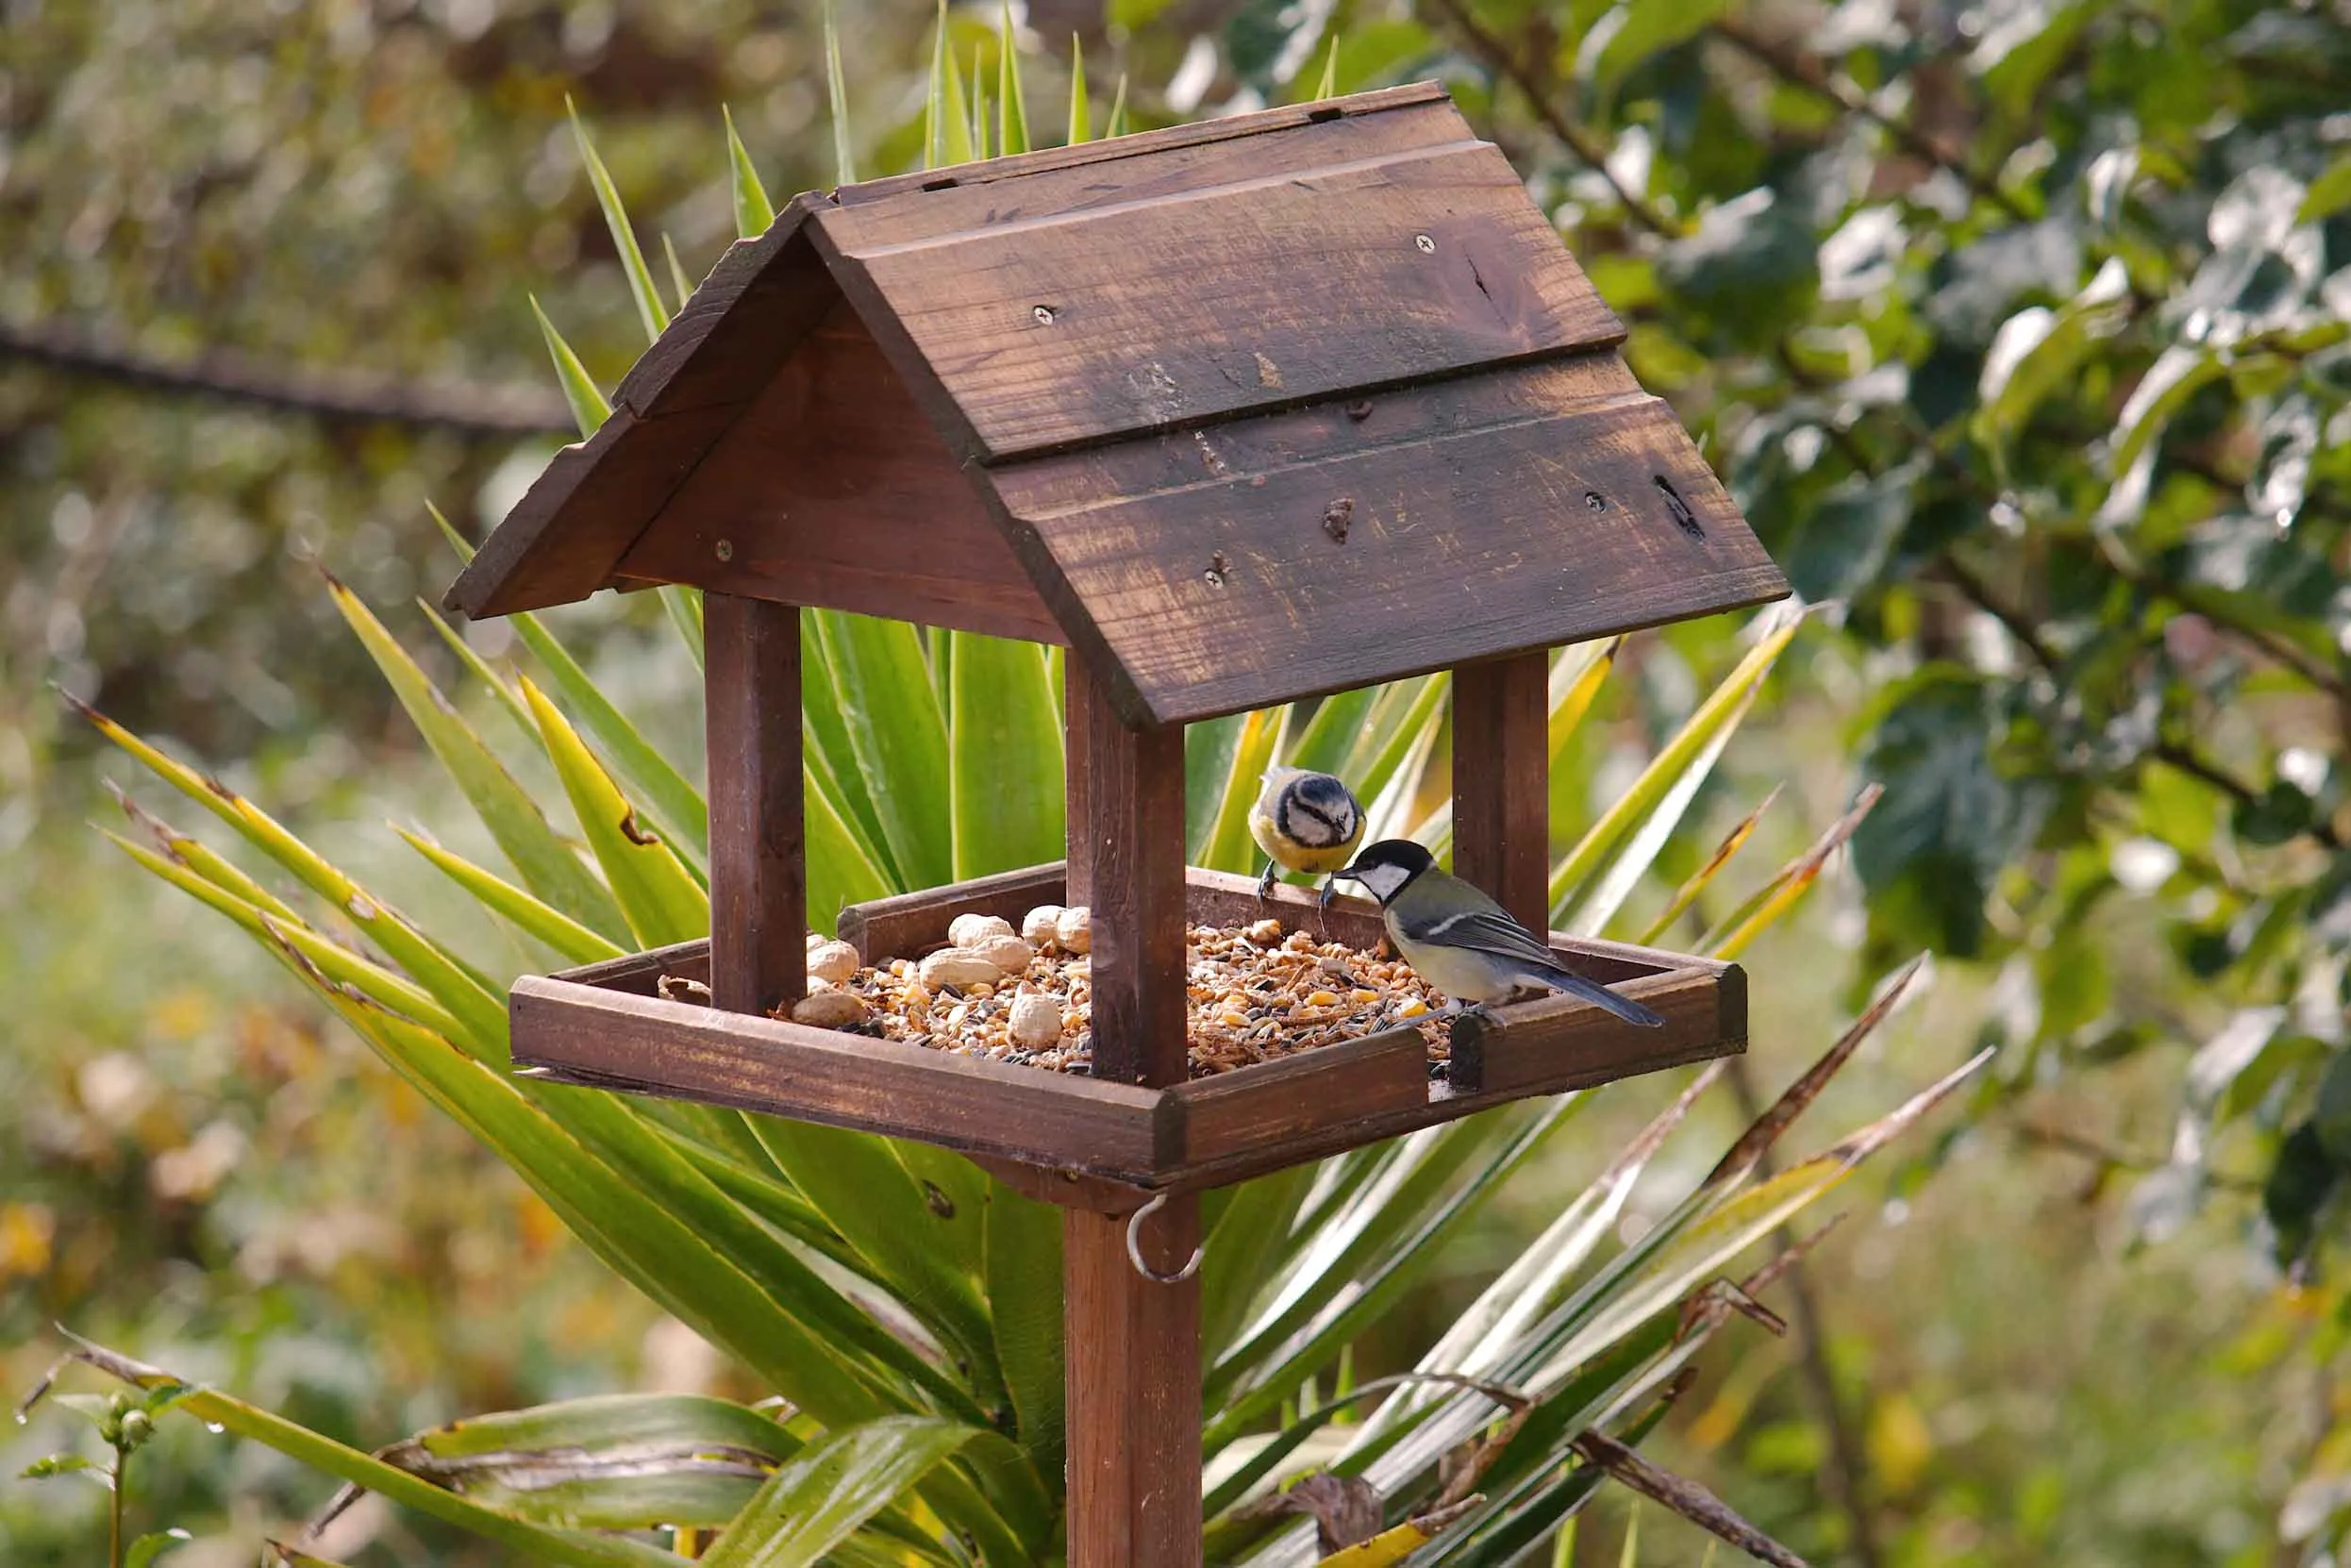 A Blue and Great Tit on a wooden bird table eating seed, surrounded by shrubbery.